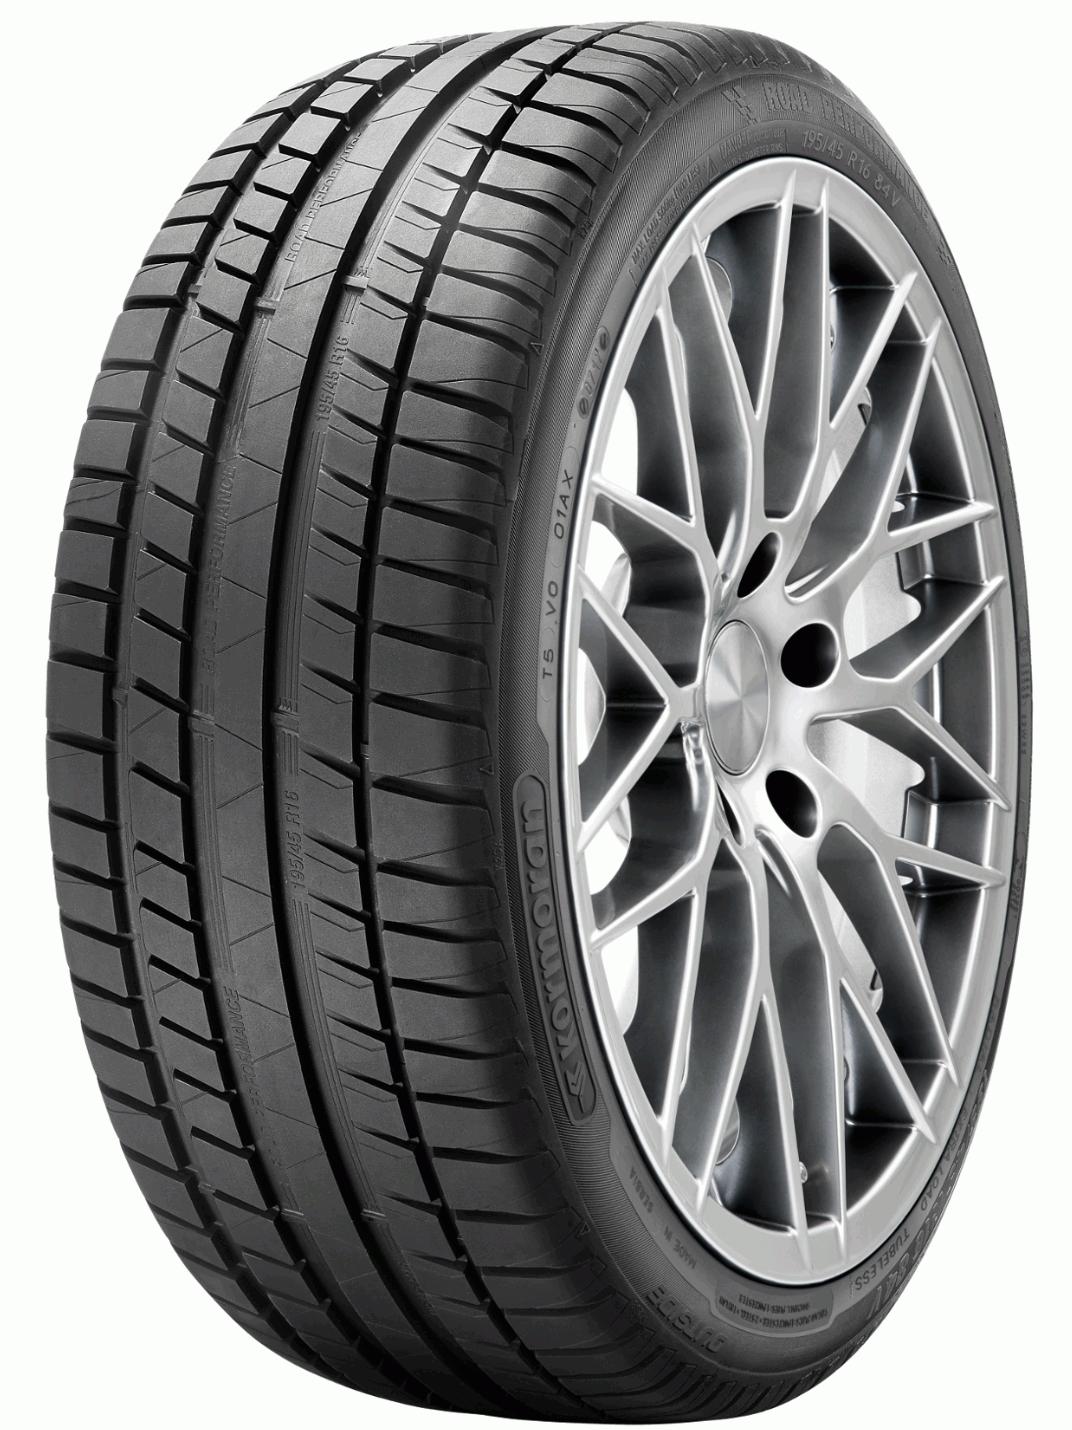 Riken Road Performance - Tire Tests and Reviews